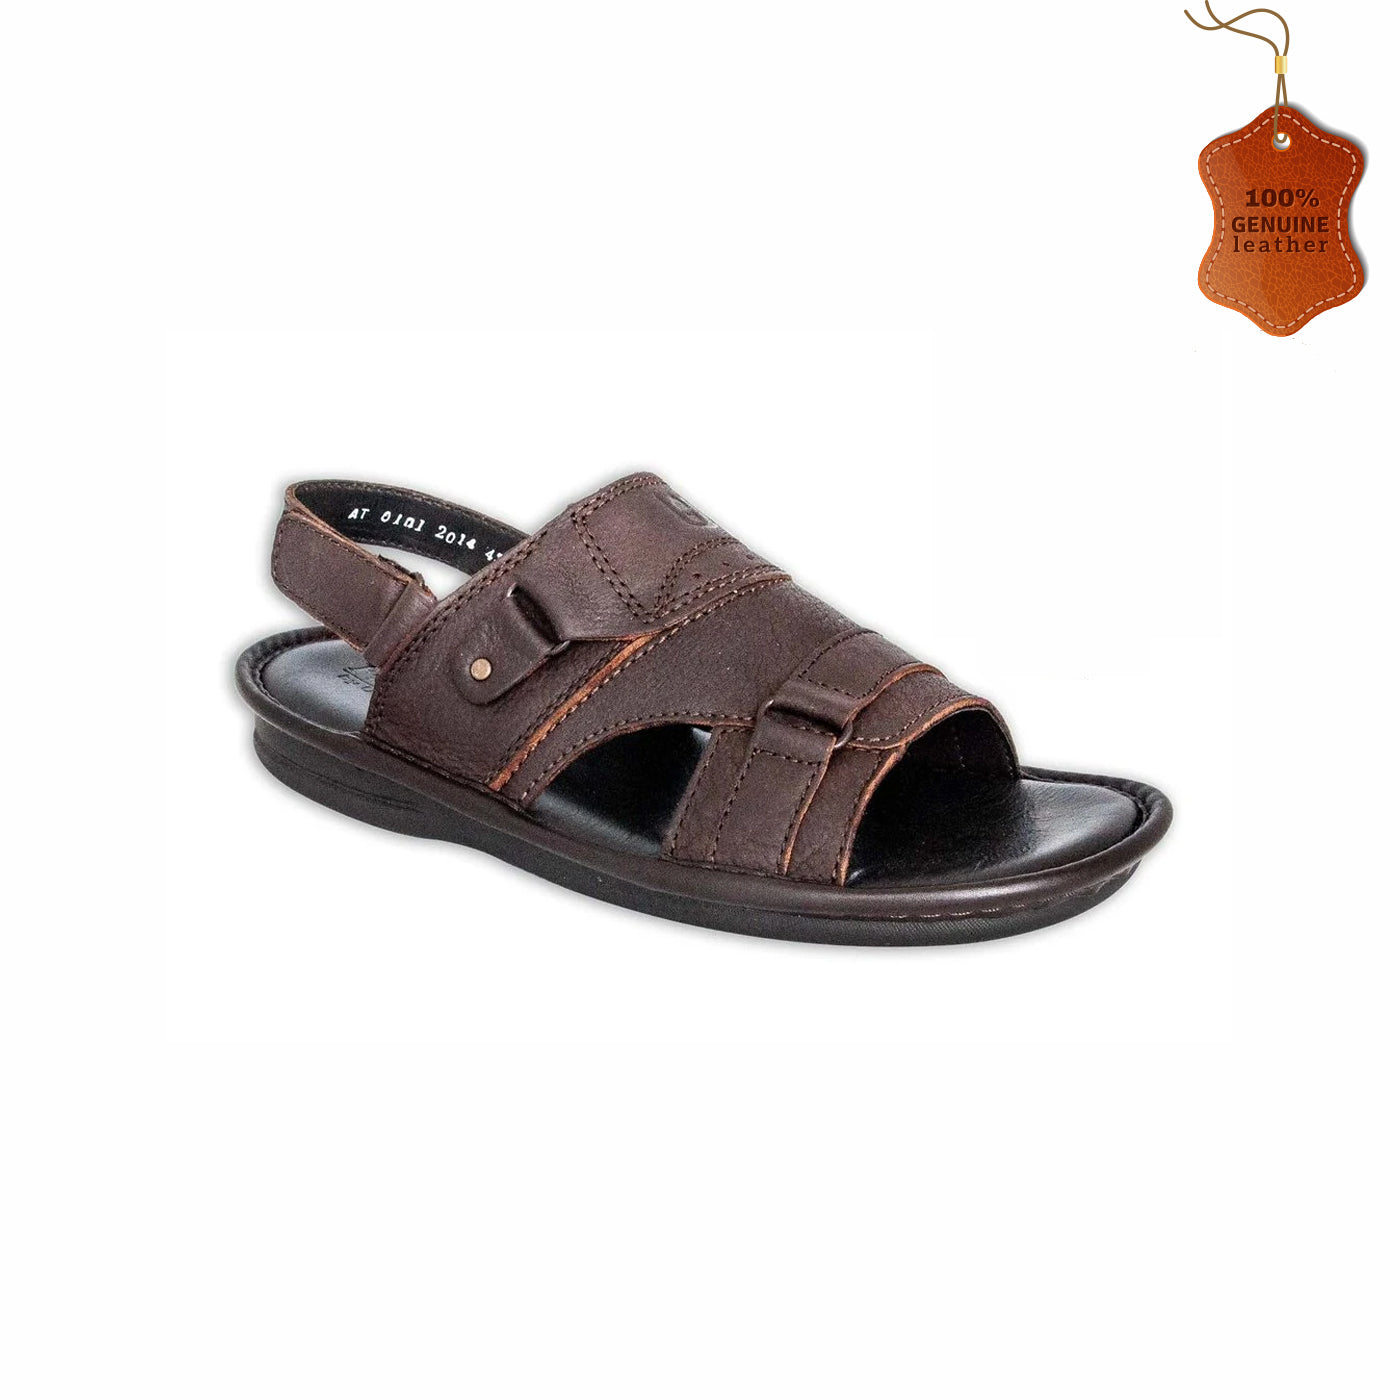 Broad Strapped Mens Leather Sandals